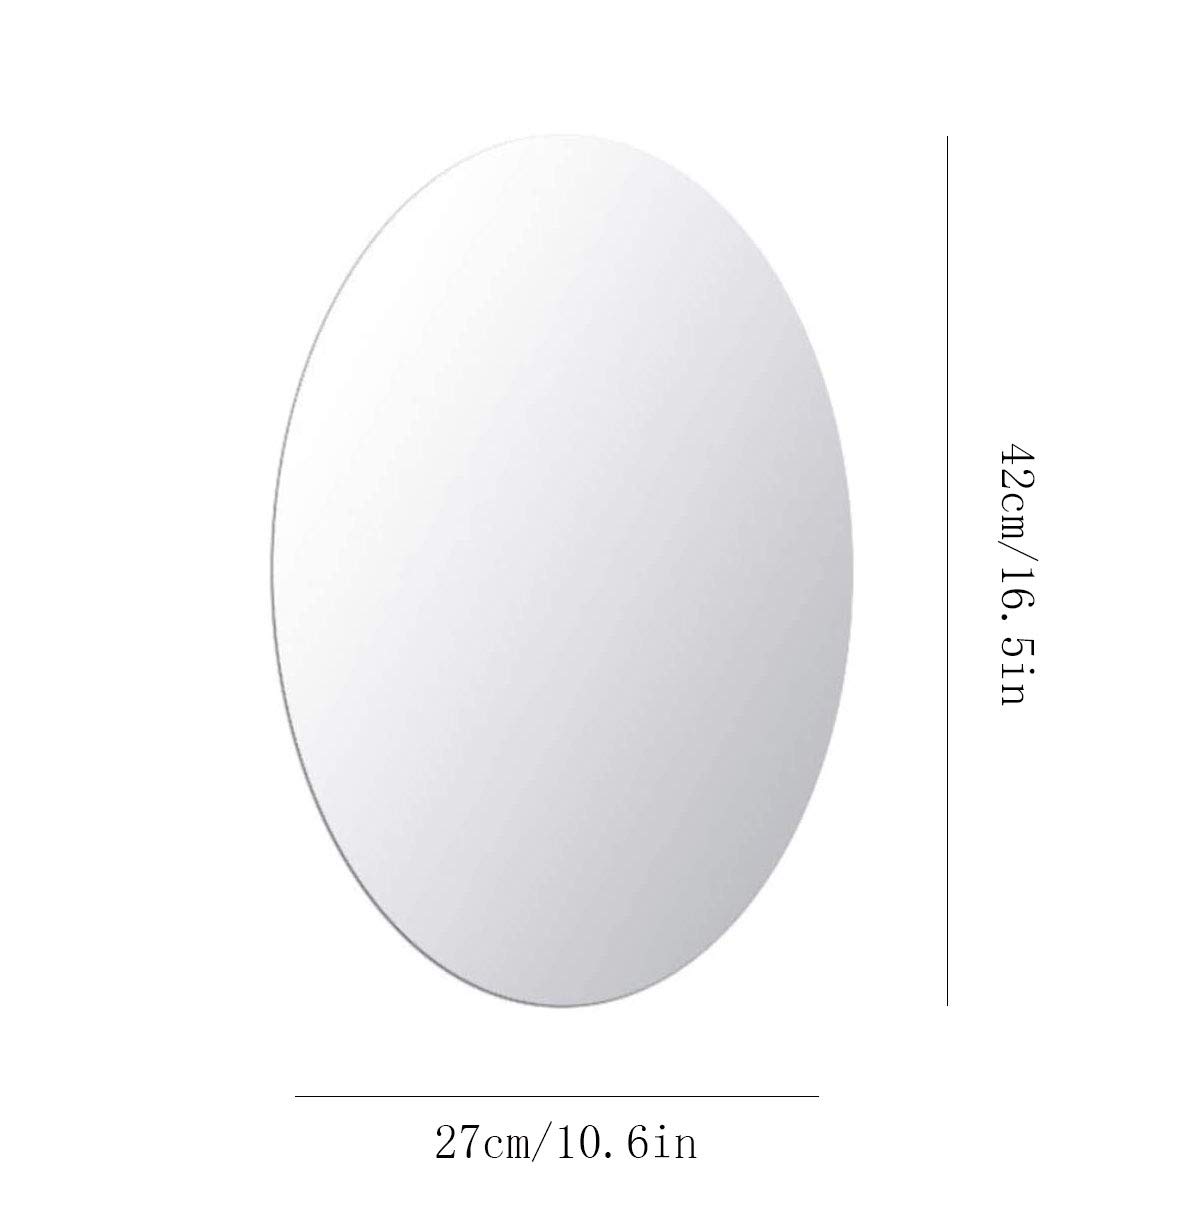 Oval Removable Acrylic Mirror Setting Wall Sticker Decal for Home Living Room Bedroom Bathroom Decor